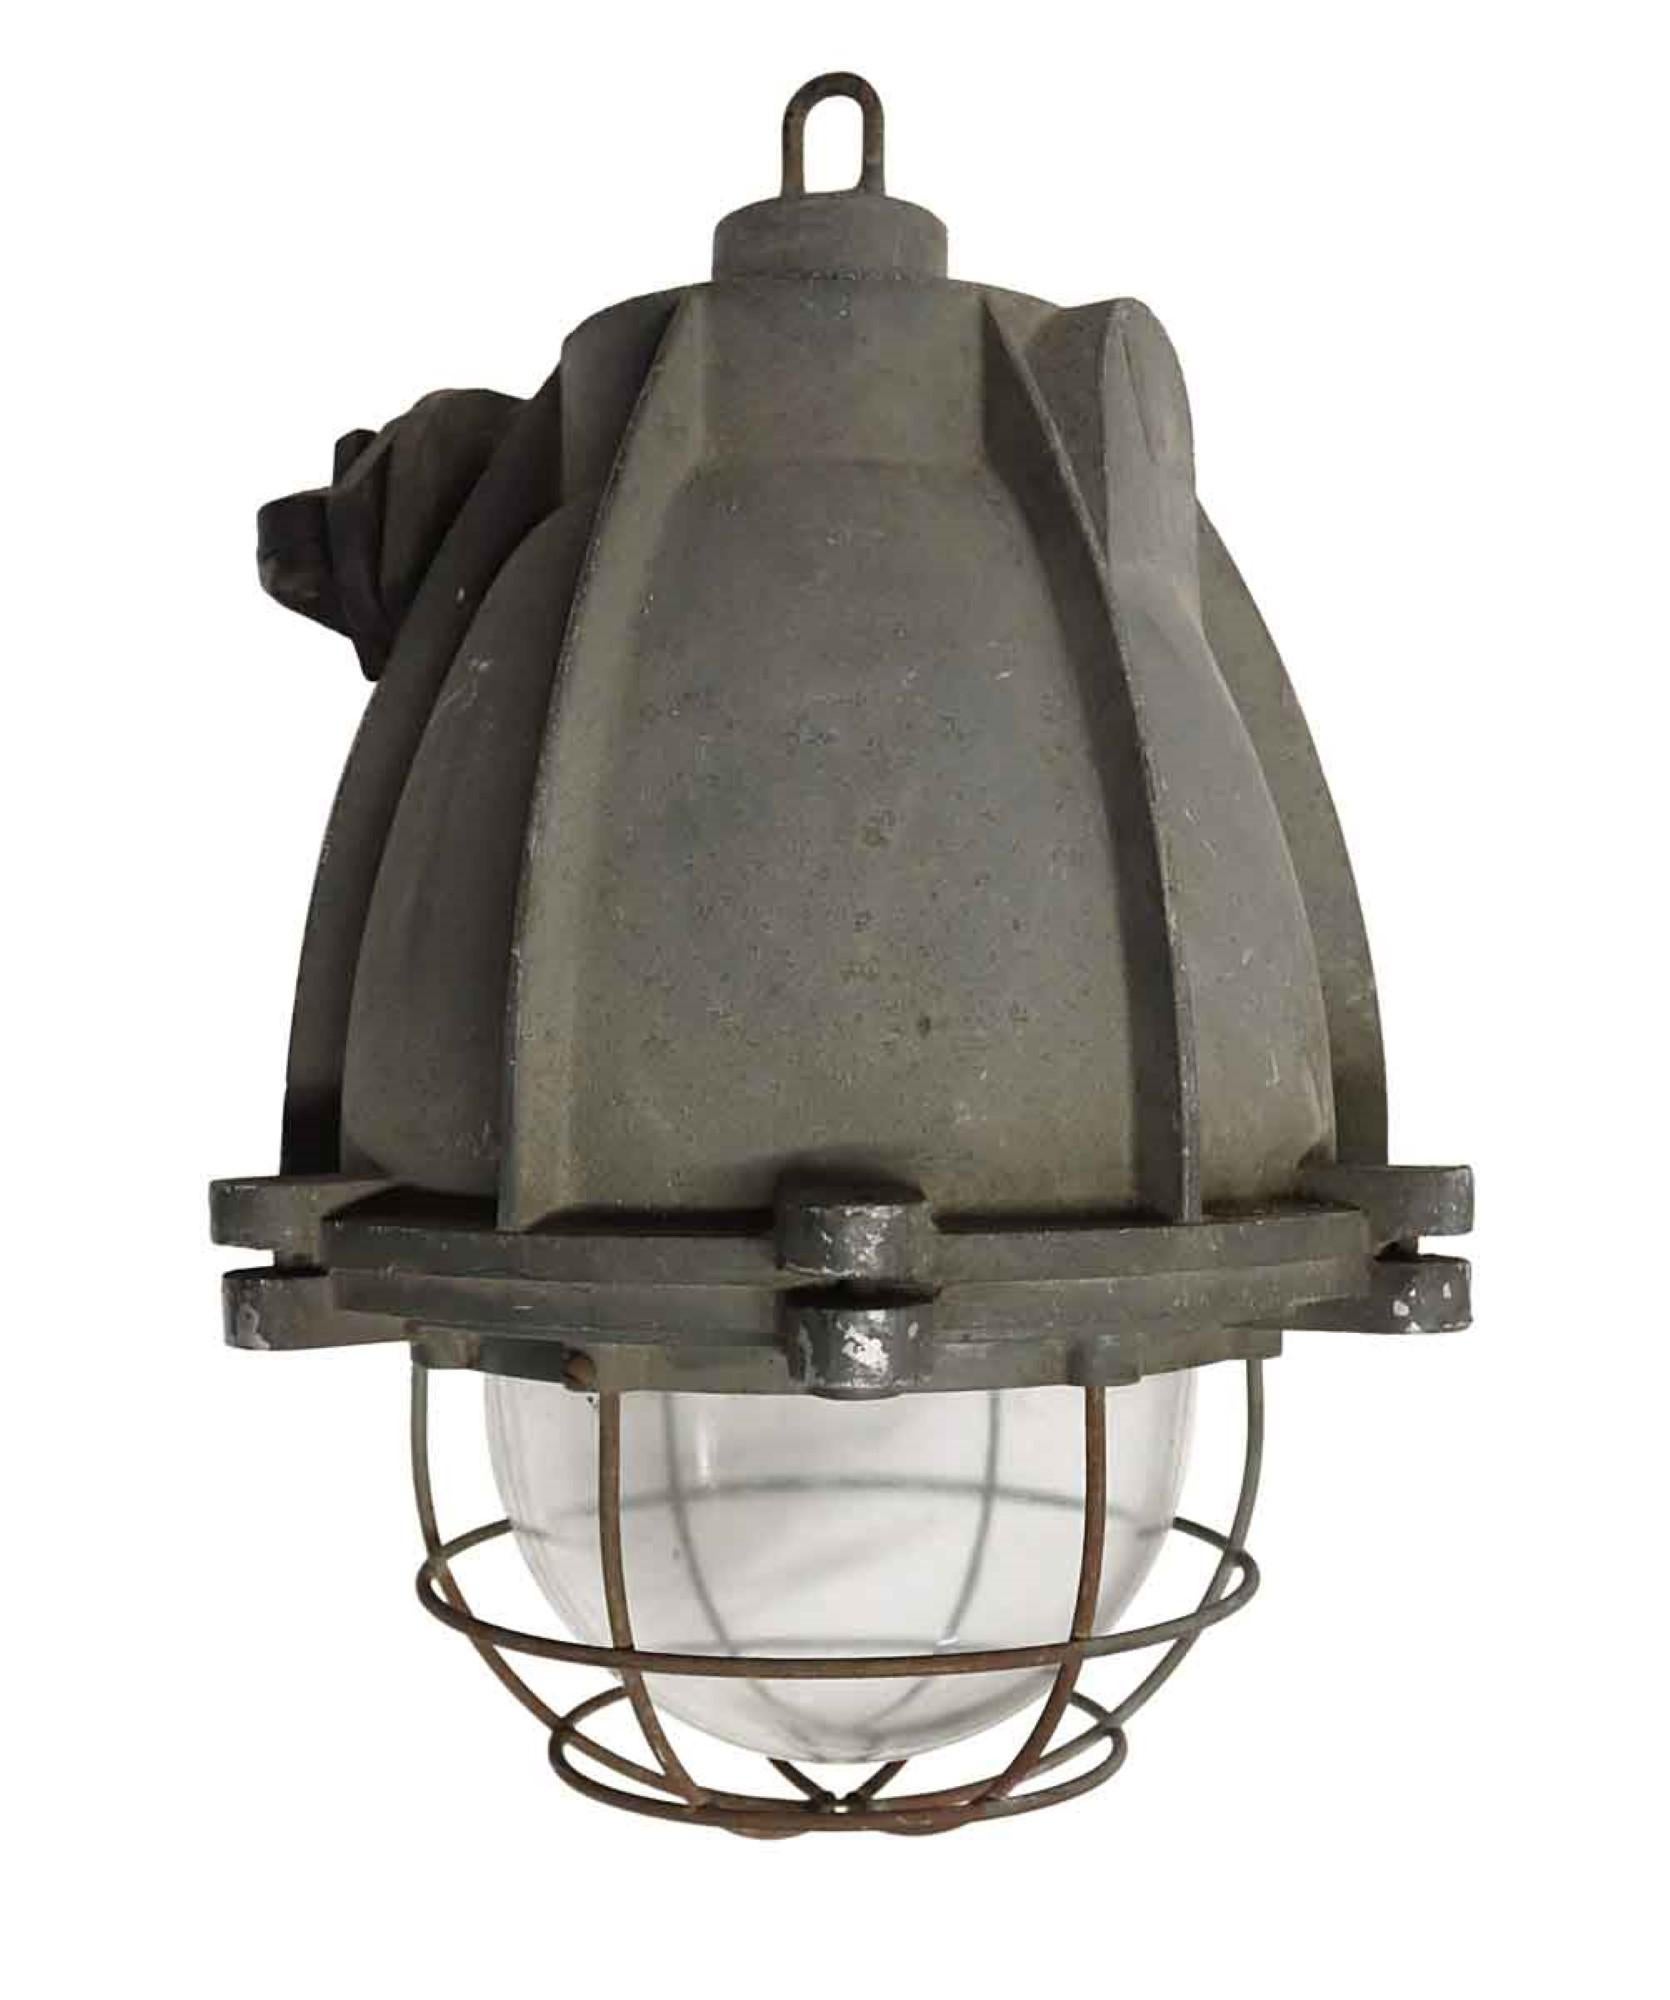 1970s vintage heavy cast aluminum light with cage covered glass. Industrial style pendant from Europe. Single socket. This can be seen at our 400 Gilligan St location in Scranton, PA